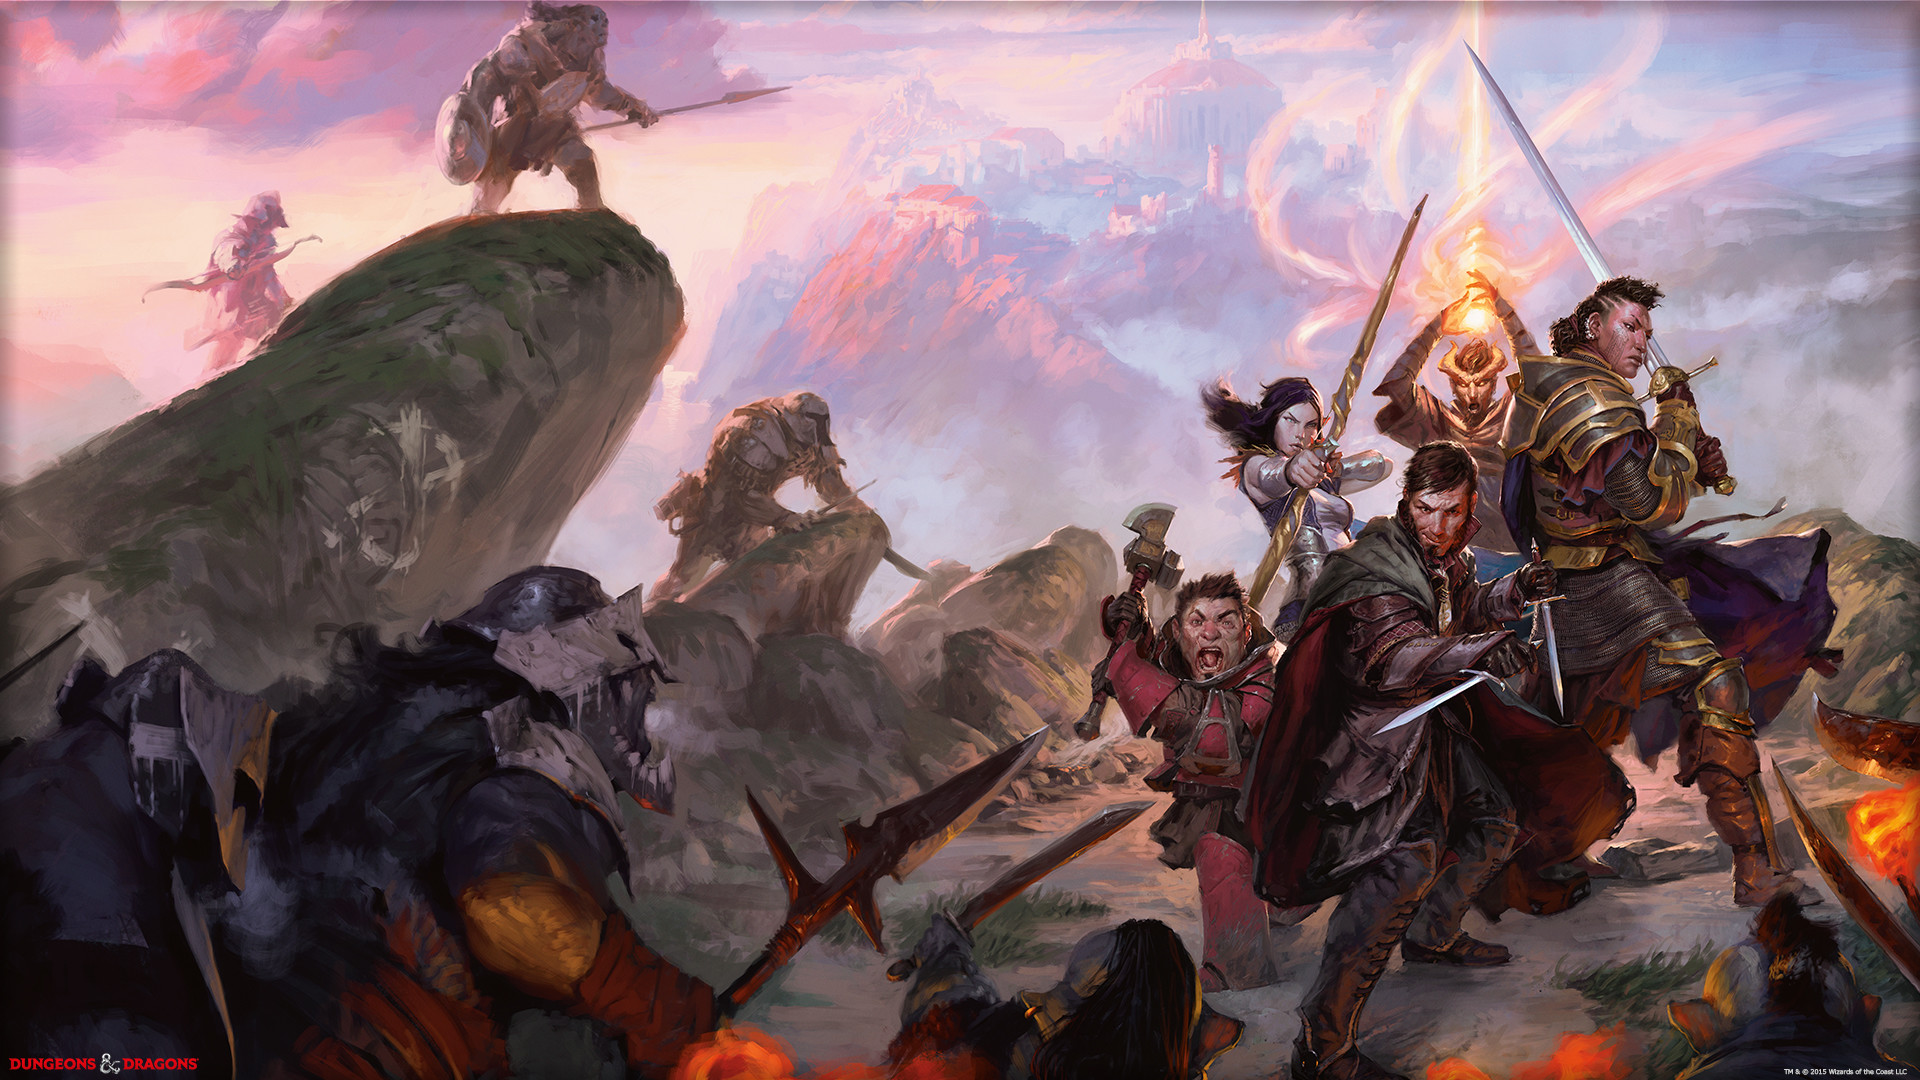 1920x1080 ... Wallpapers | Dungeons & Dragons Articles | Dungeons & Dragons ...